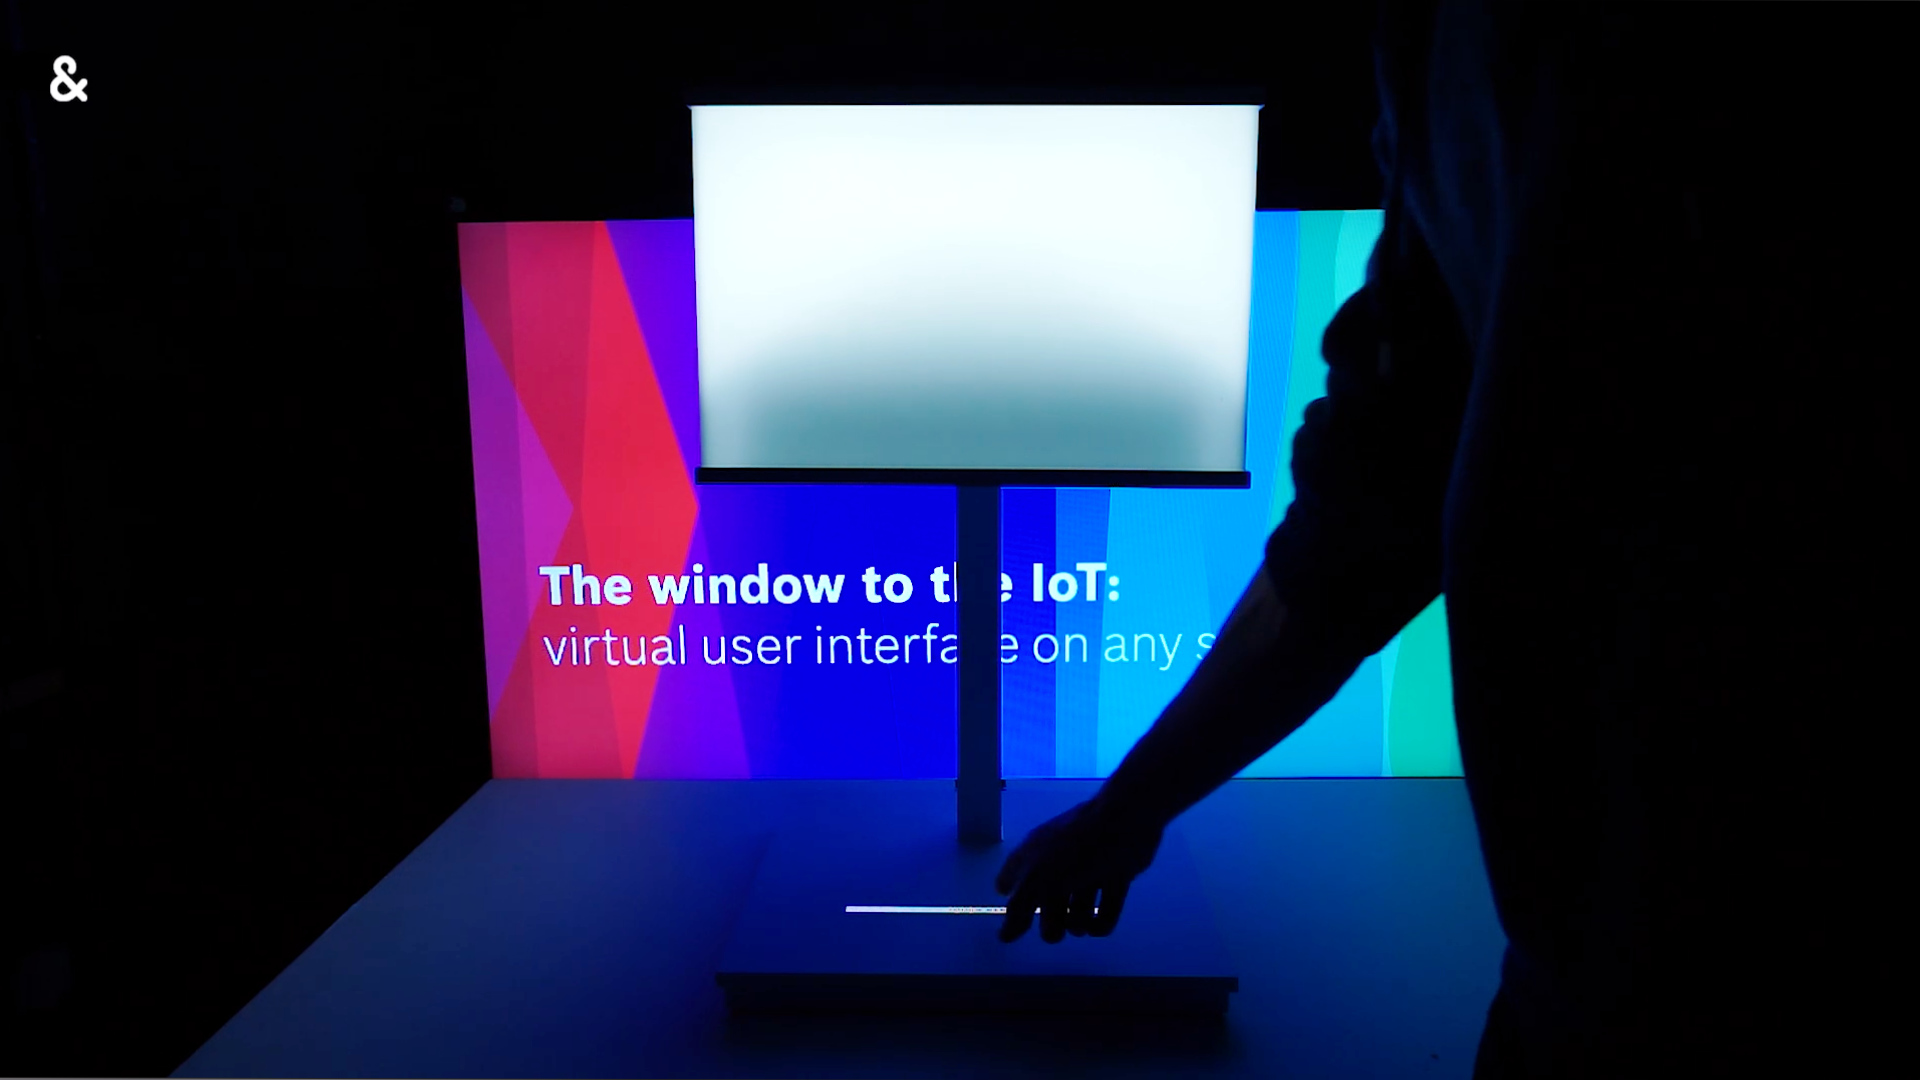 Interactive laser projector integrated into a lamp at CES 2018.